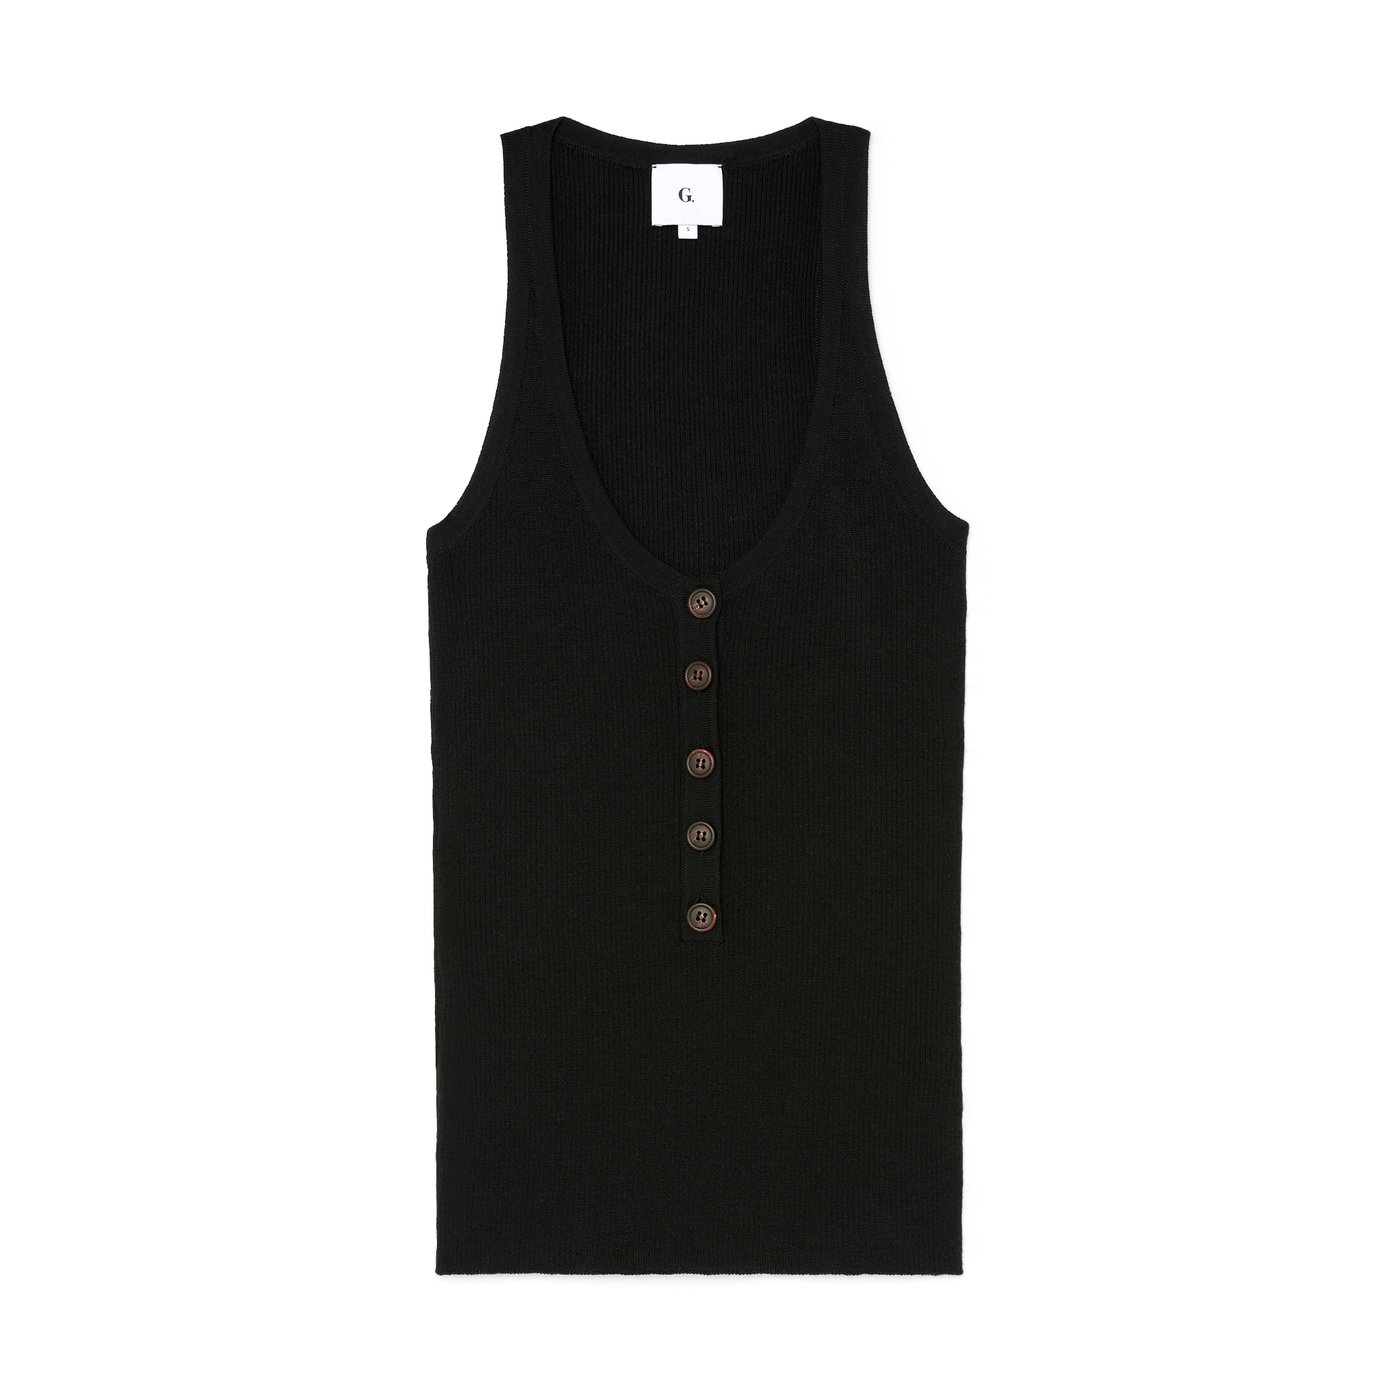 G. Label by goop Ying Henley Tank